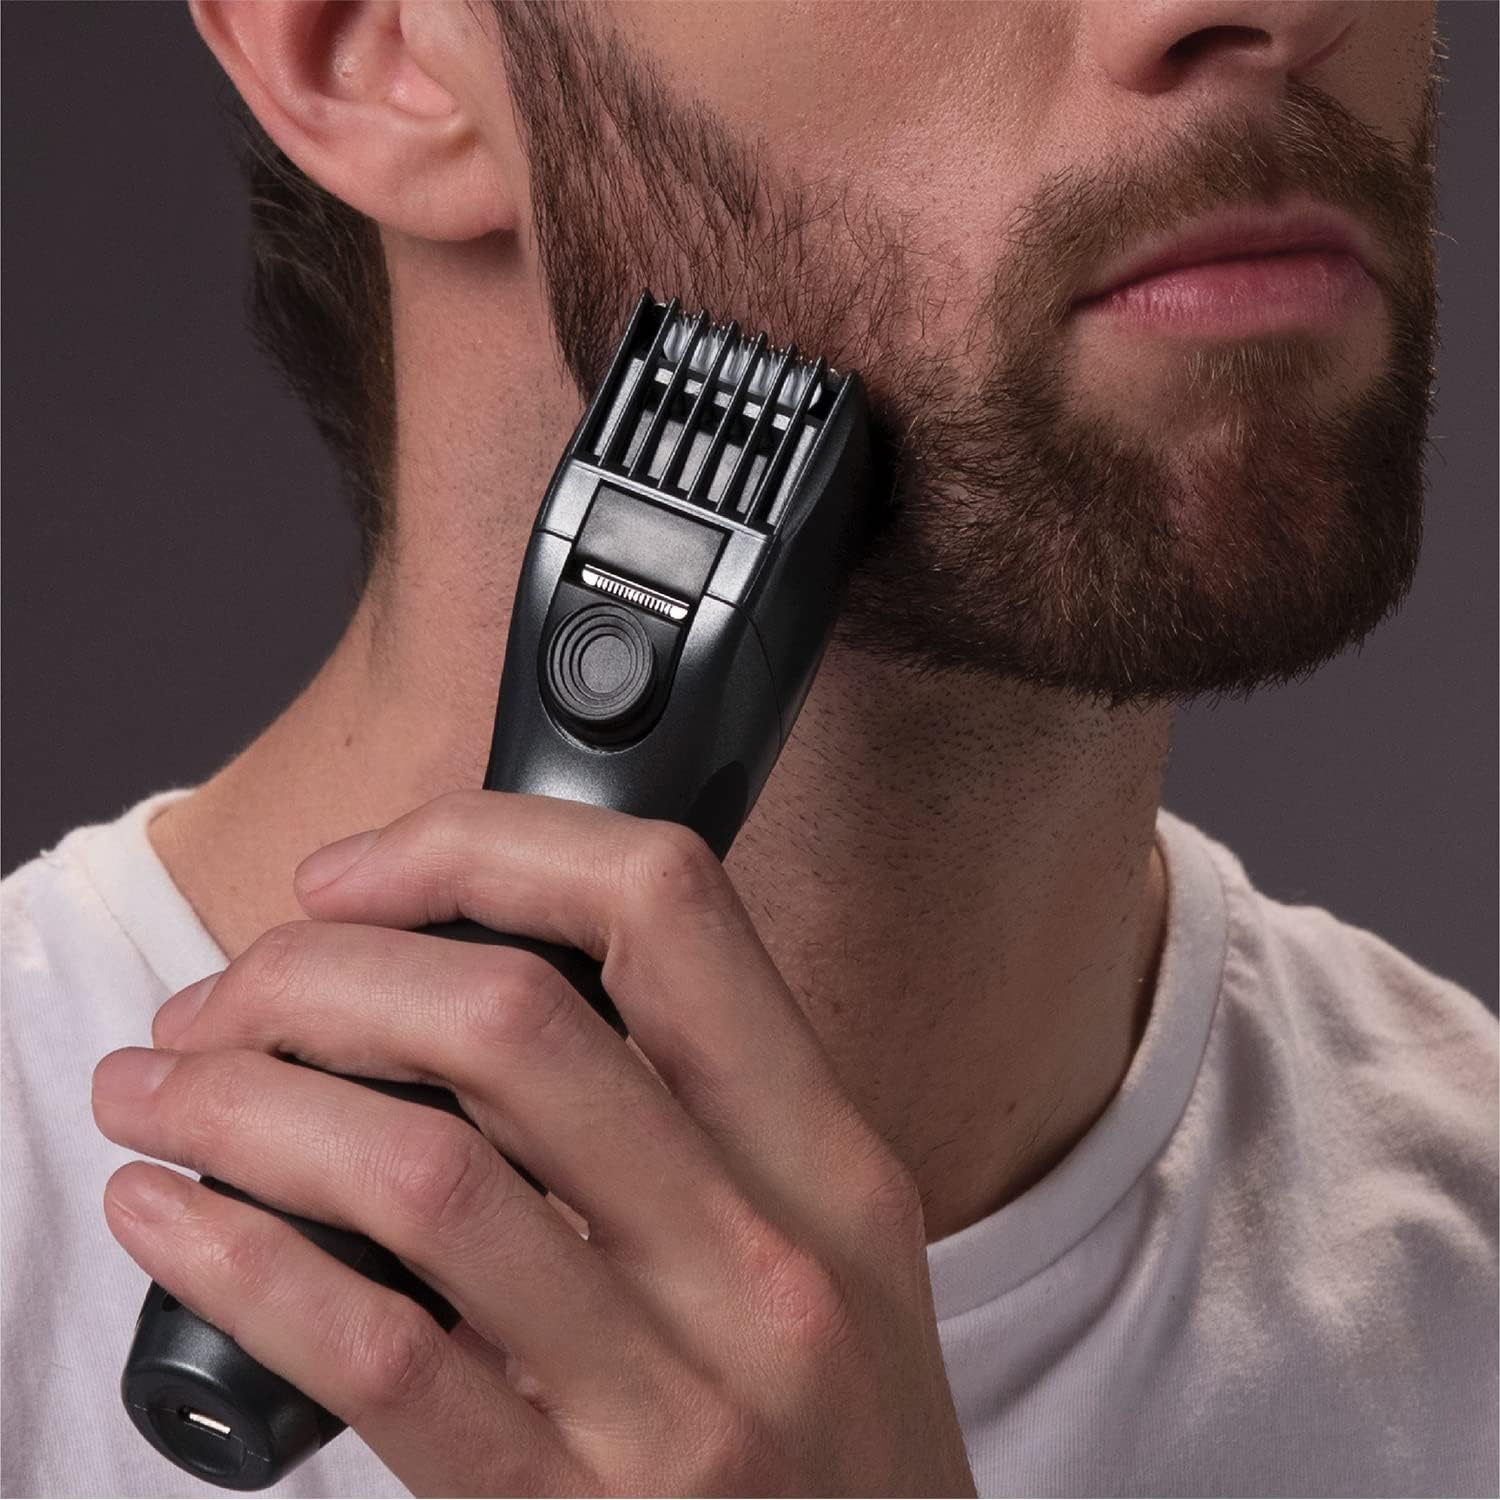 Remington Lithium Barba Beard Trimmer - Advanced Ceramic Blades, 9 Length Settings, Pop-up Trimmer, Comb Attachment, 60-Minute Runtime, Cordless - MB350L